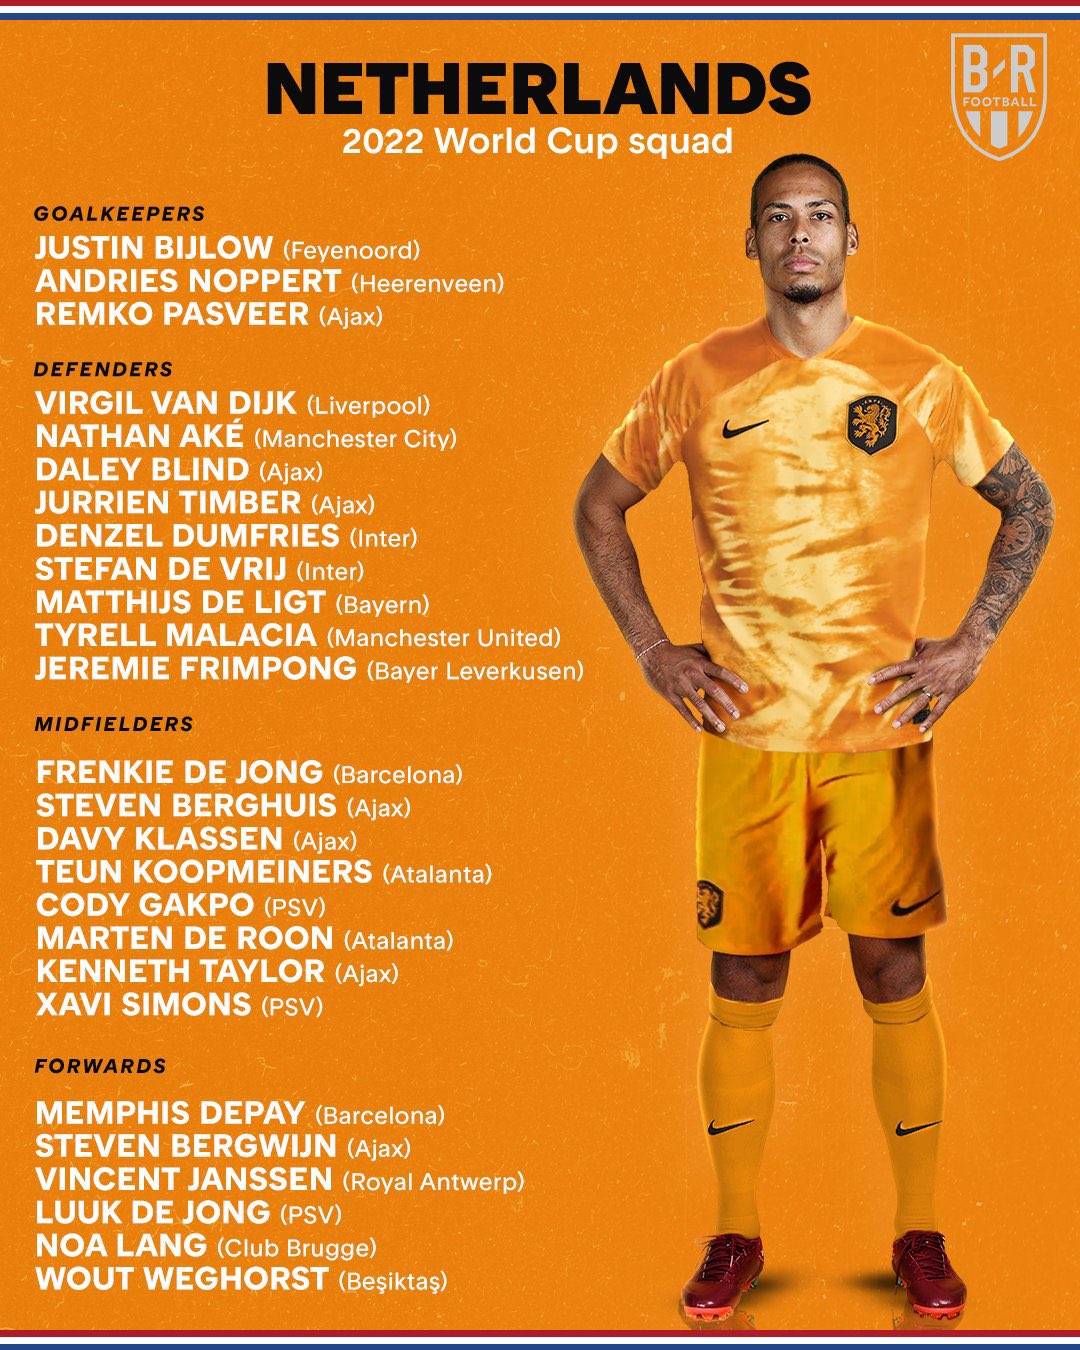 List of the Netherlands for Qatar 2022 